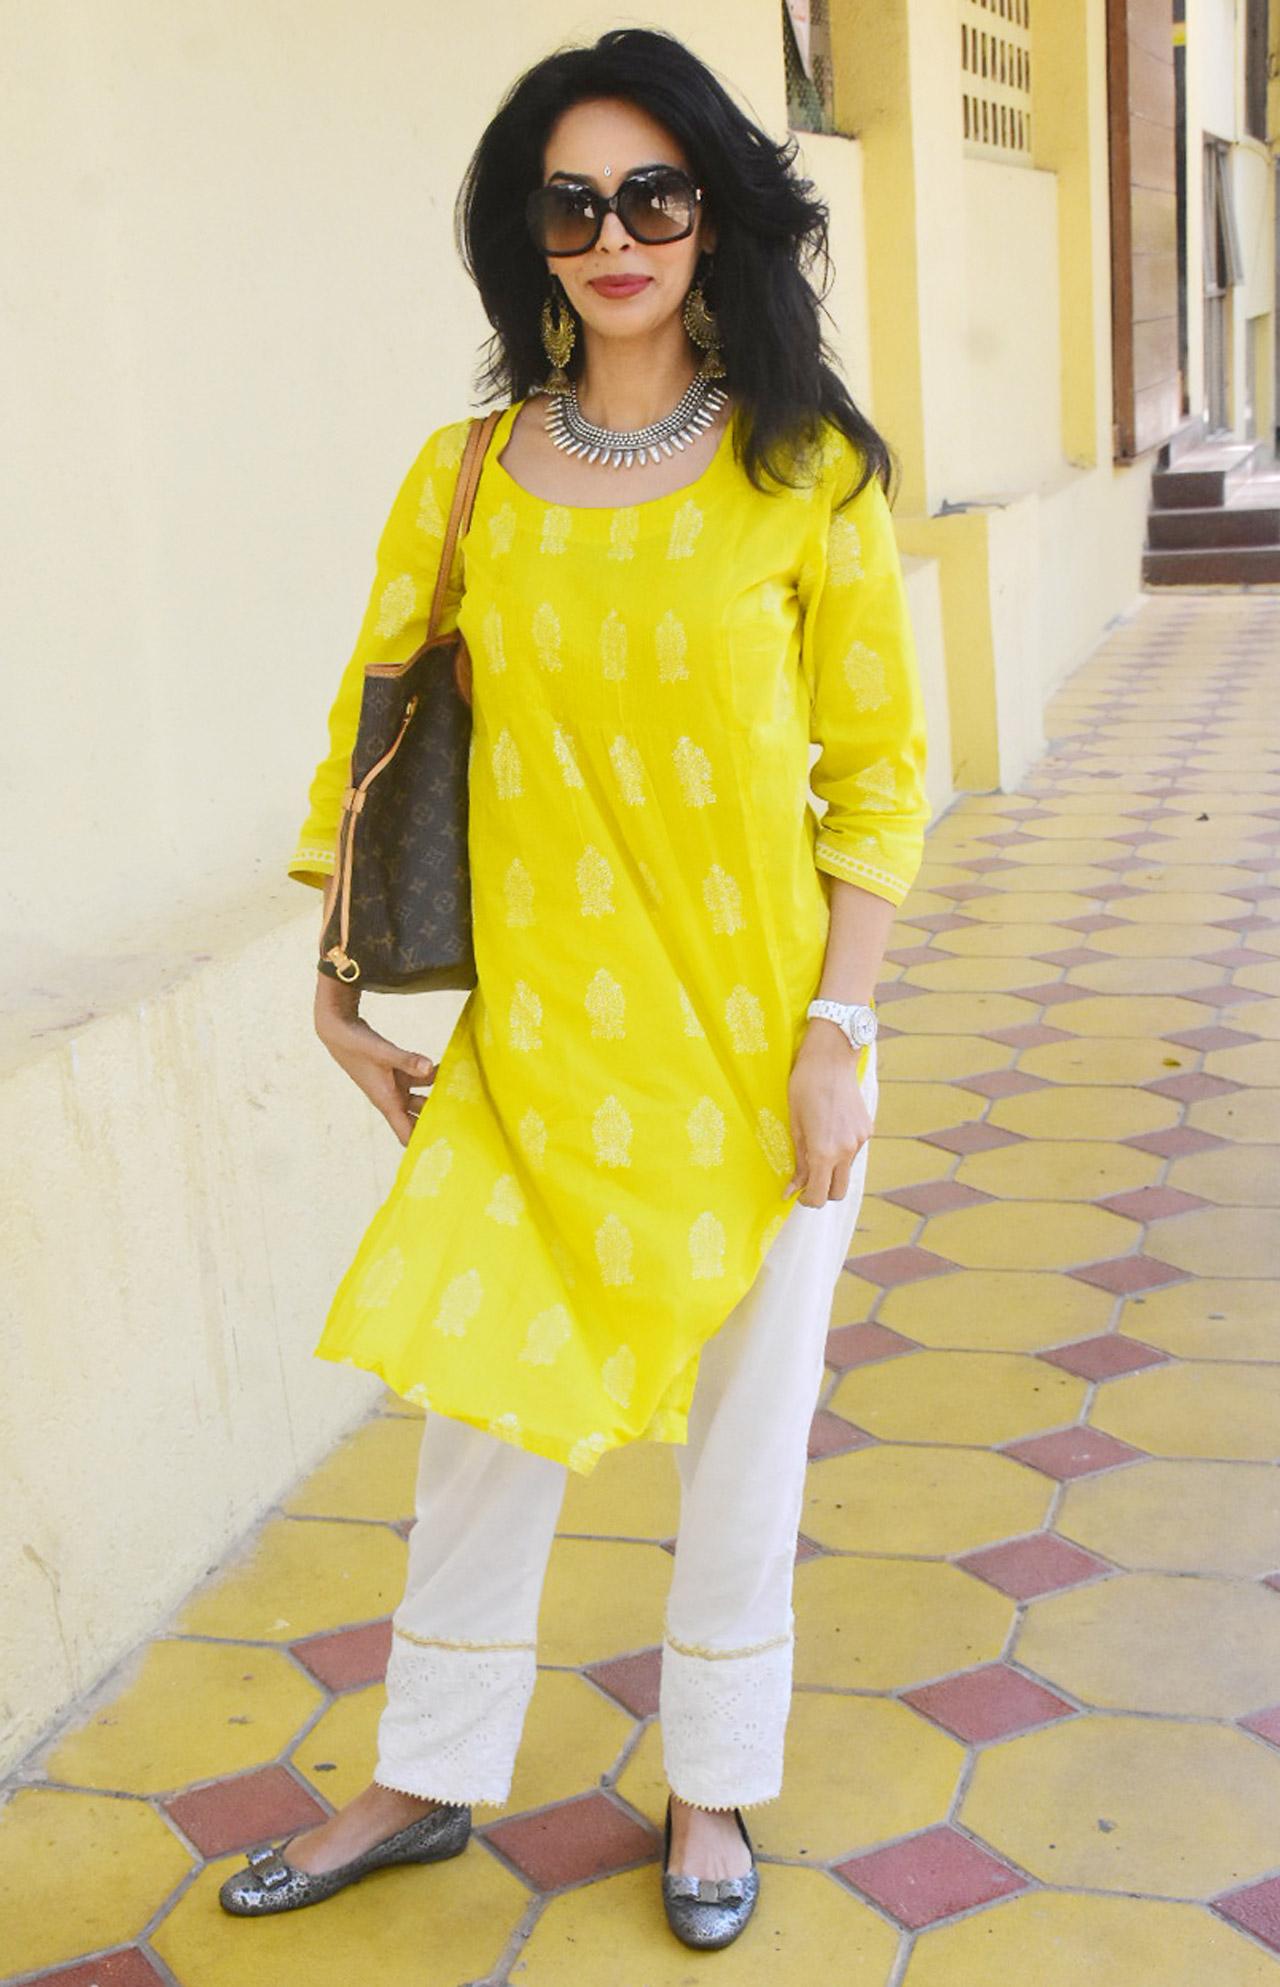 Mallika Sherawat looked fresh as a daisy, as she went out and about in Bandra, Mumbai. The gorgeous actress opted for a yellow Kurti, white palazzo and teamed up junk jewellery to complete her look.